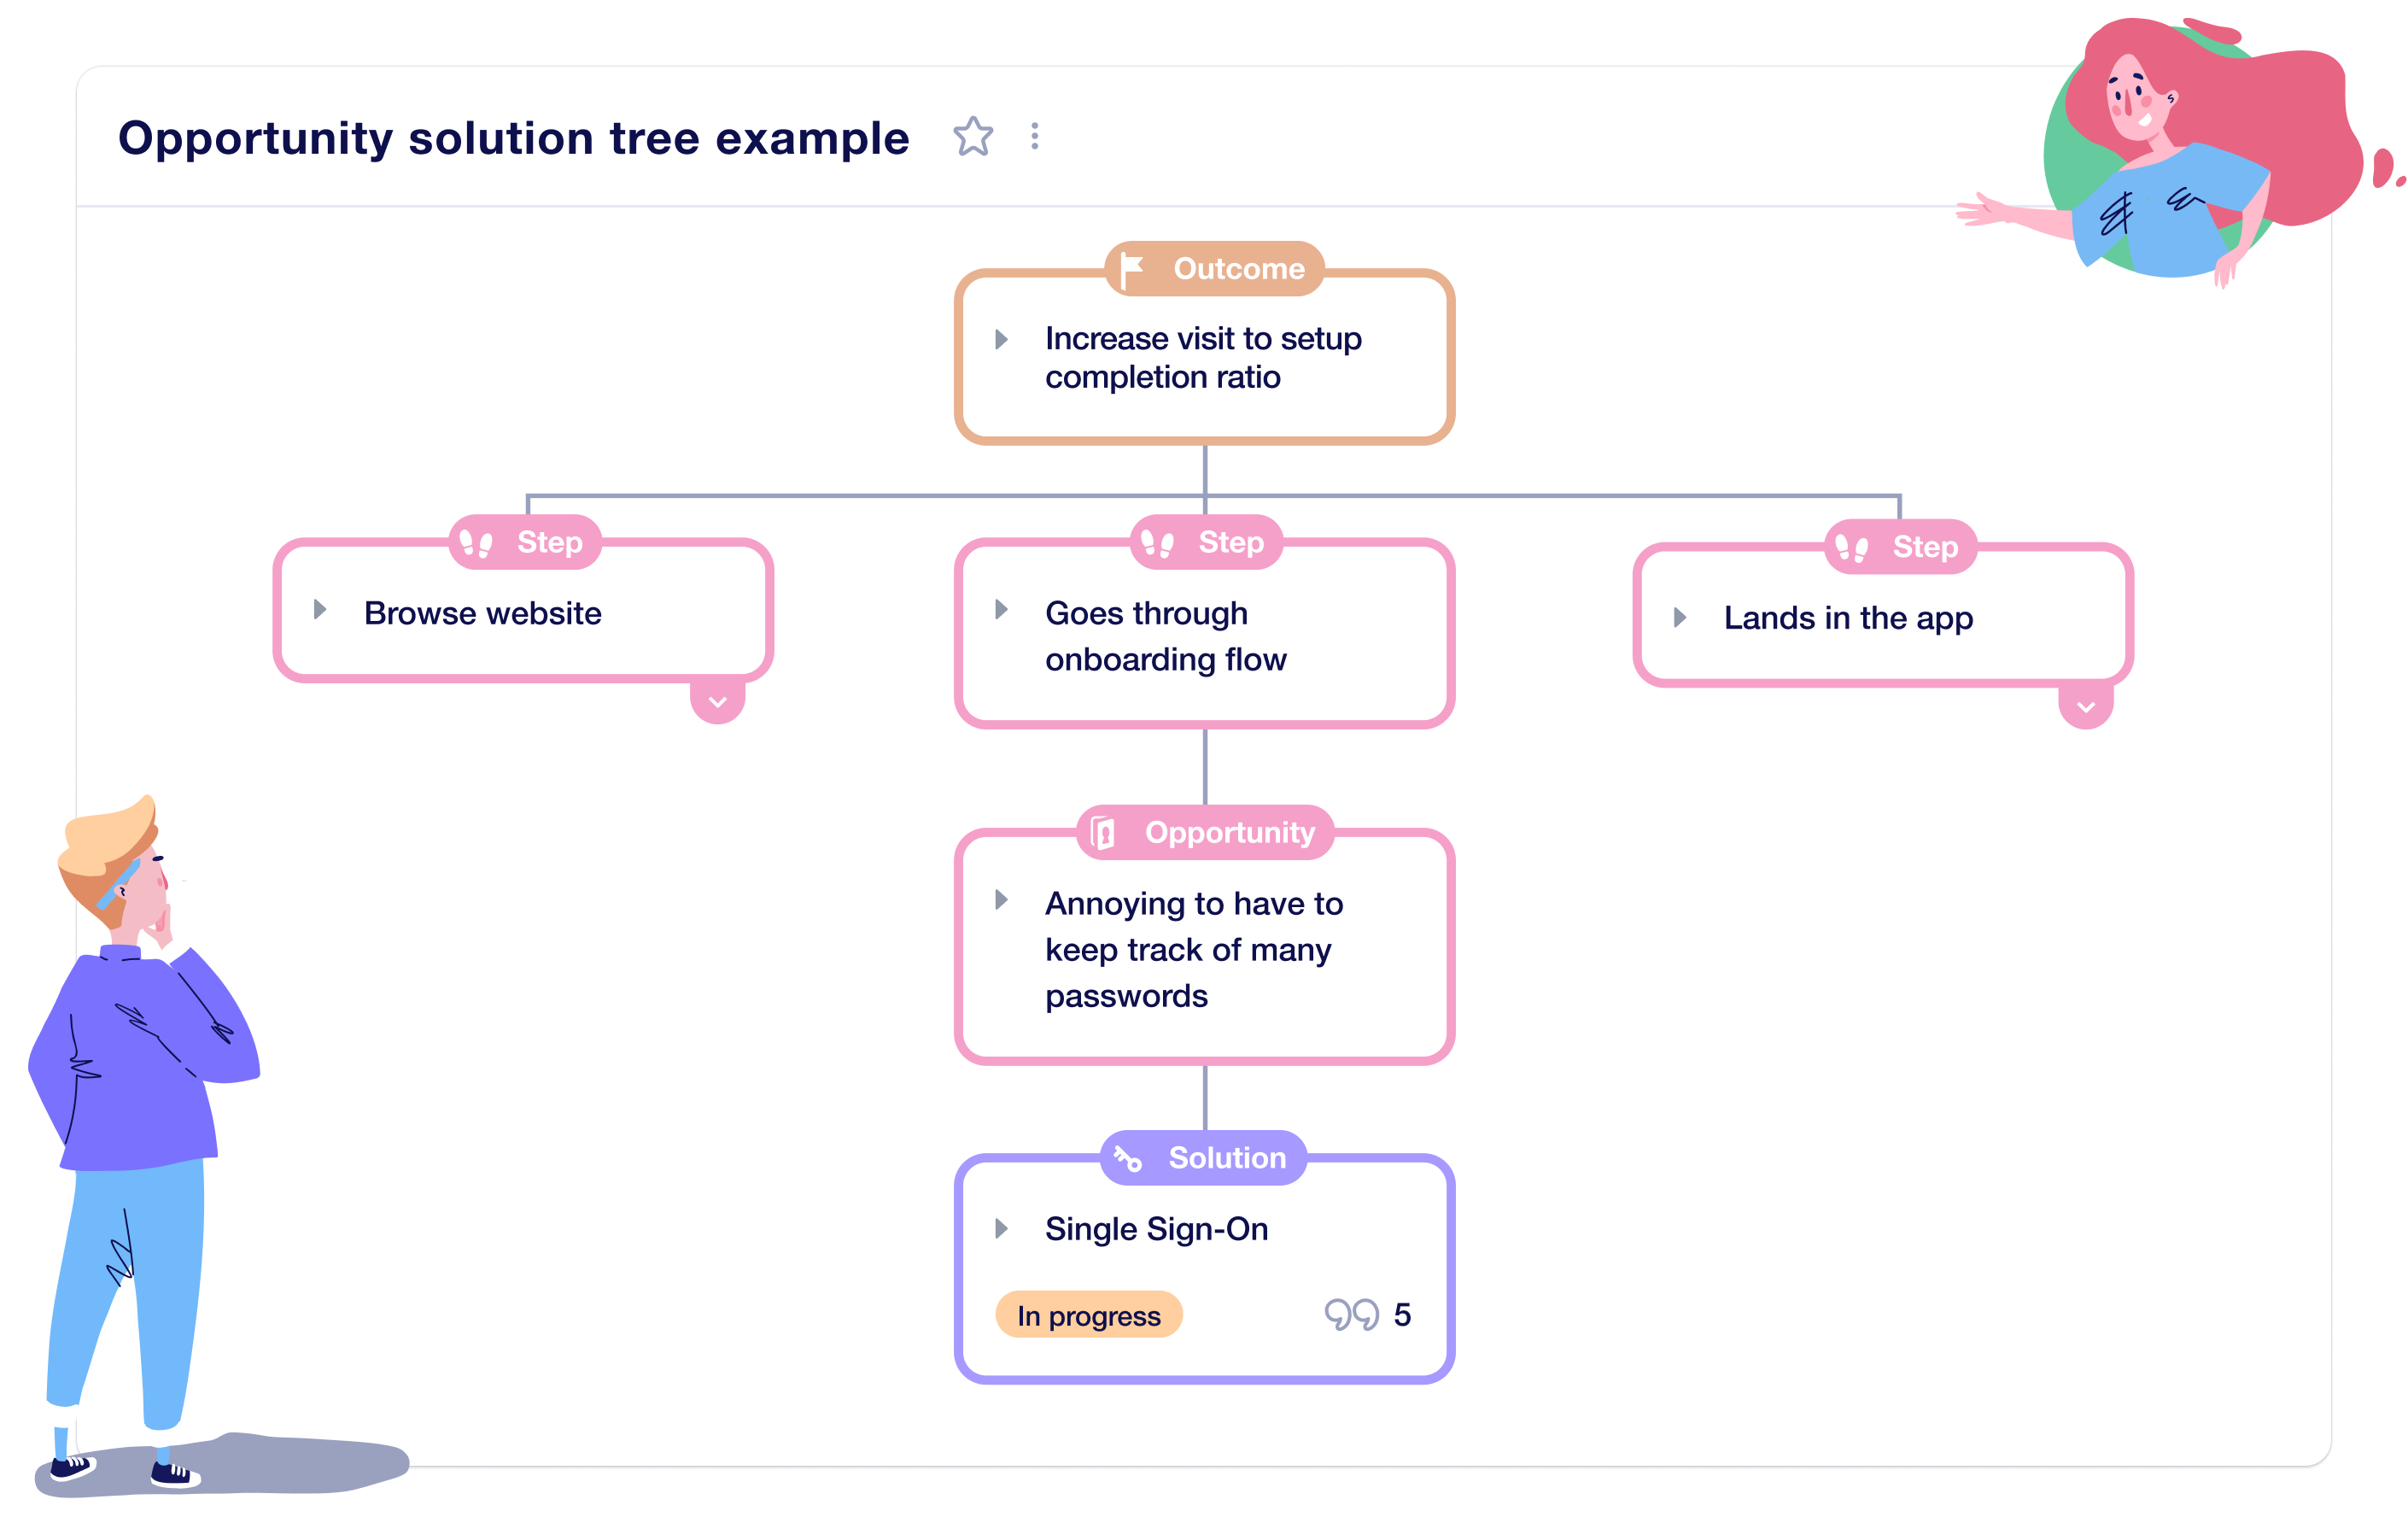 An example of an Opportunity Solution Tree